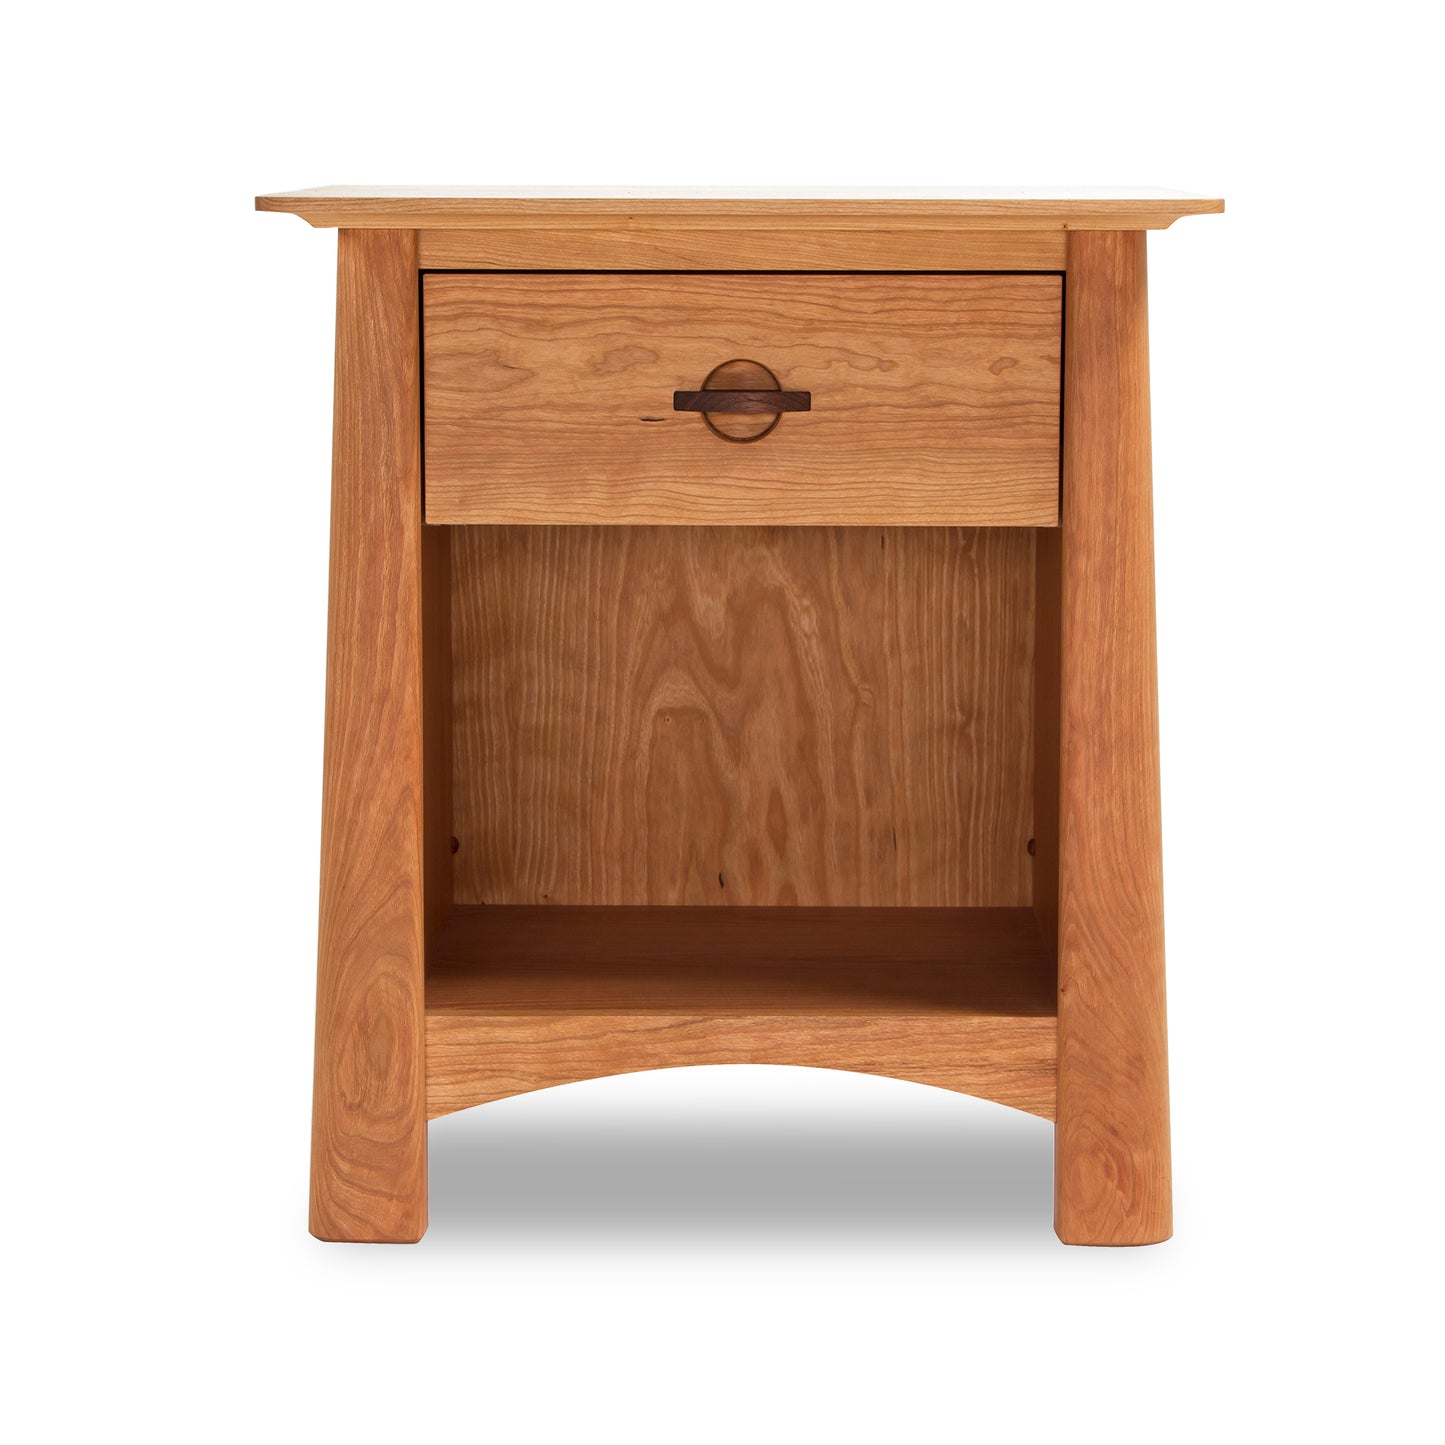 A Cherry Moon 1-Drawer Enclosed Shelf Nightstand by Maple Corner Woodworks features a single drawer with a round, metal handle and an open shelf below it. The sustainably harvested hardwoods nightstand is set against a white background and has a simple.